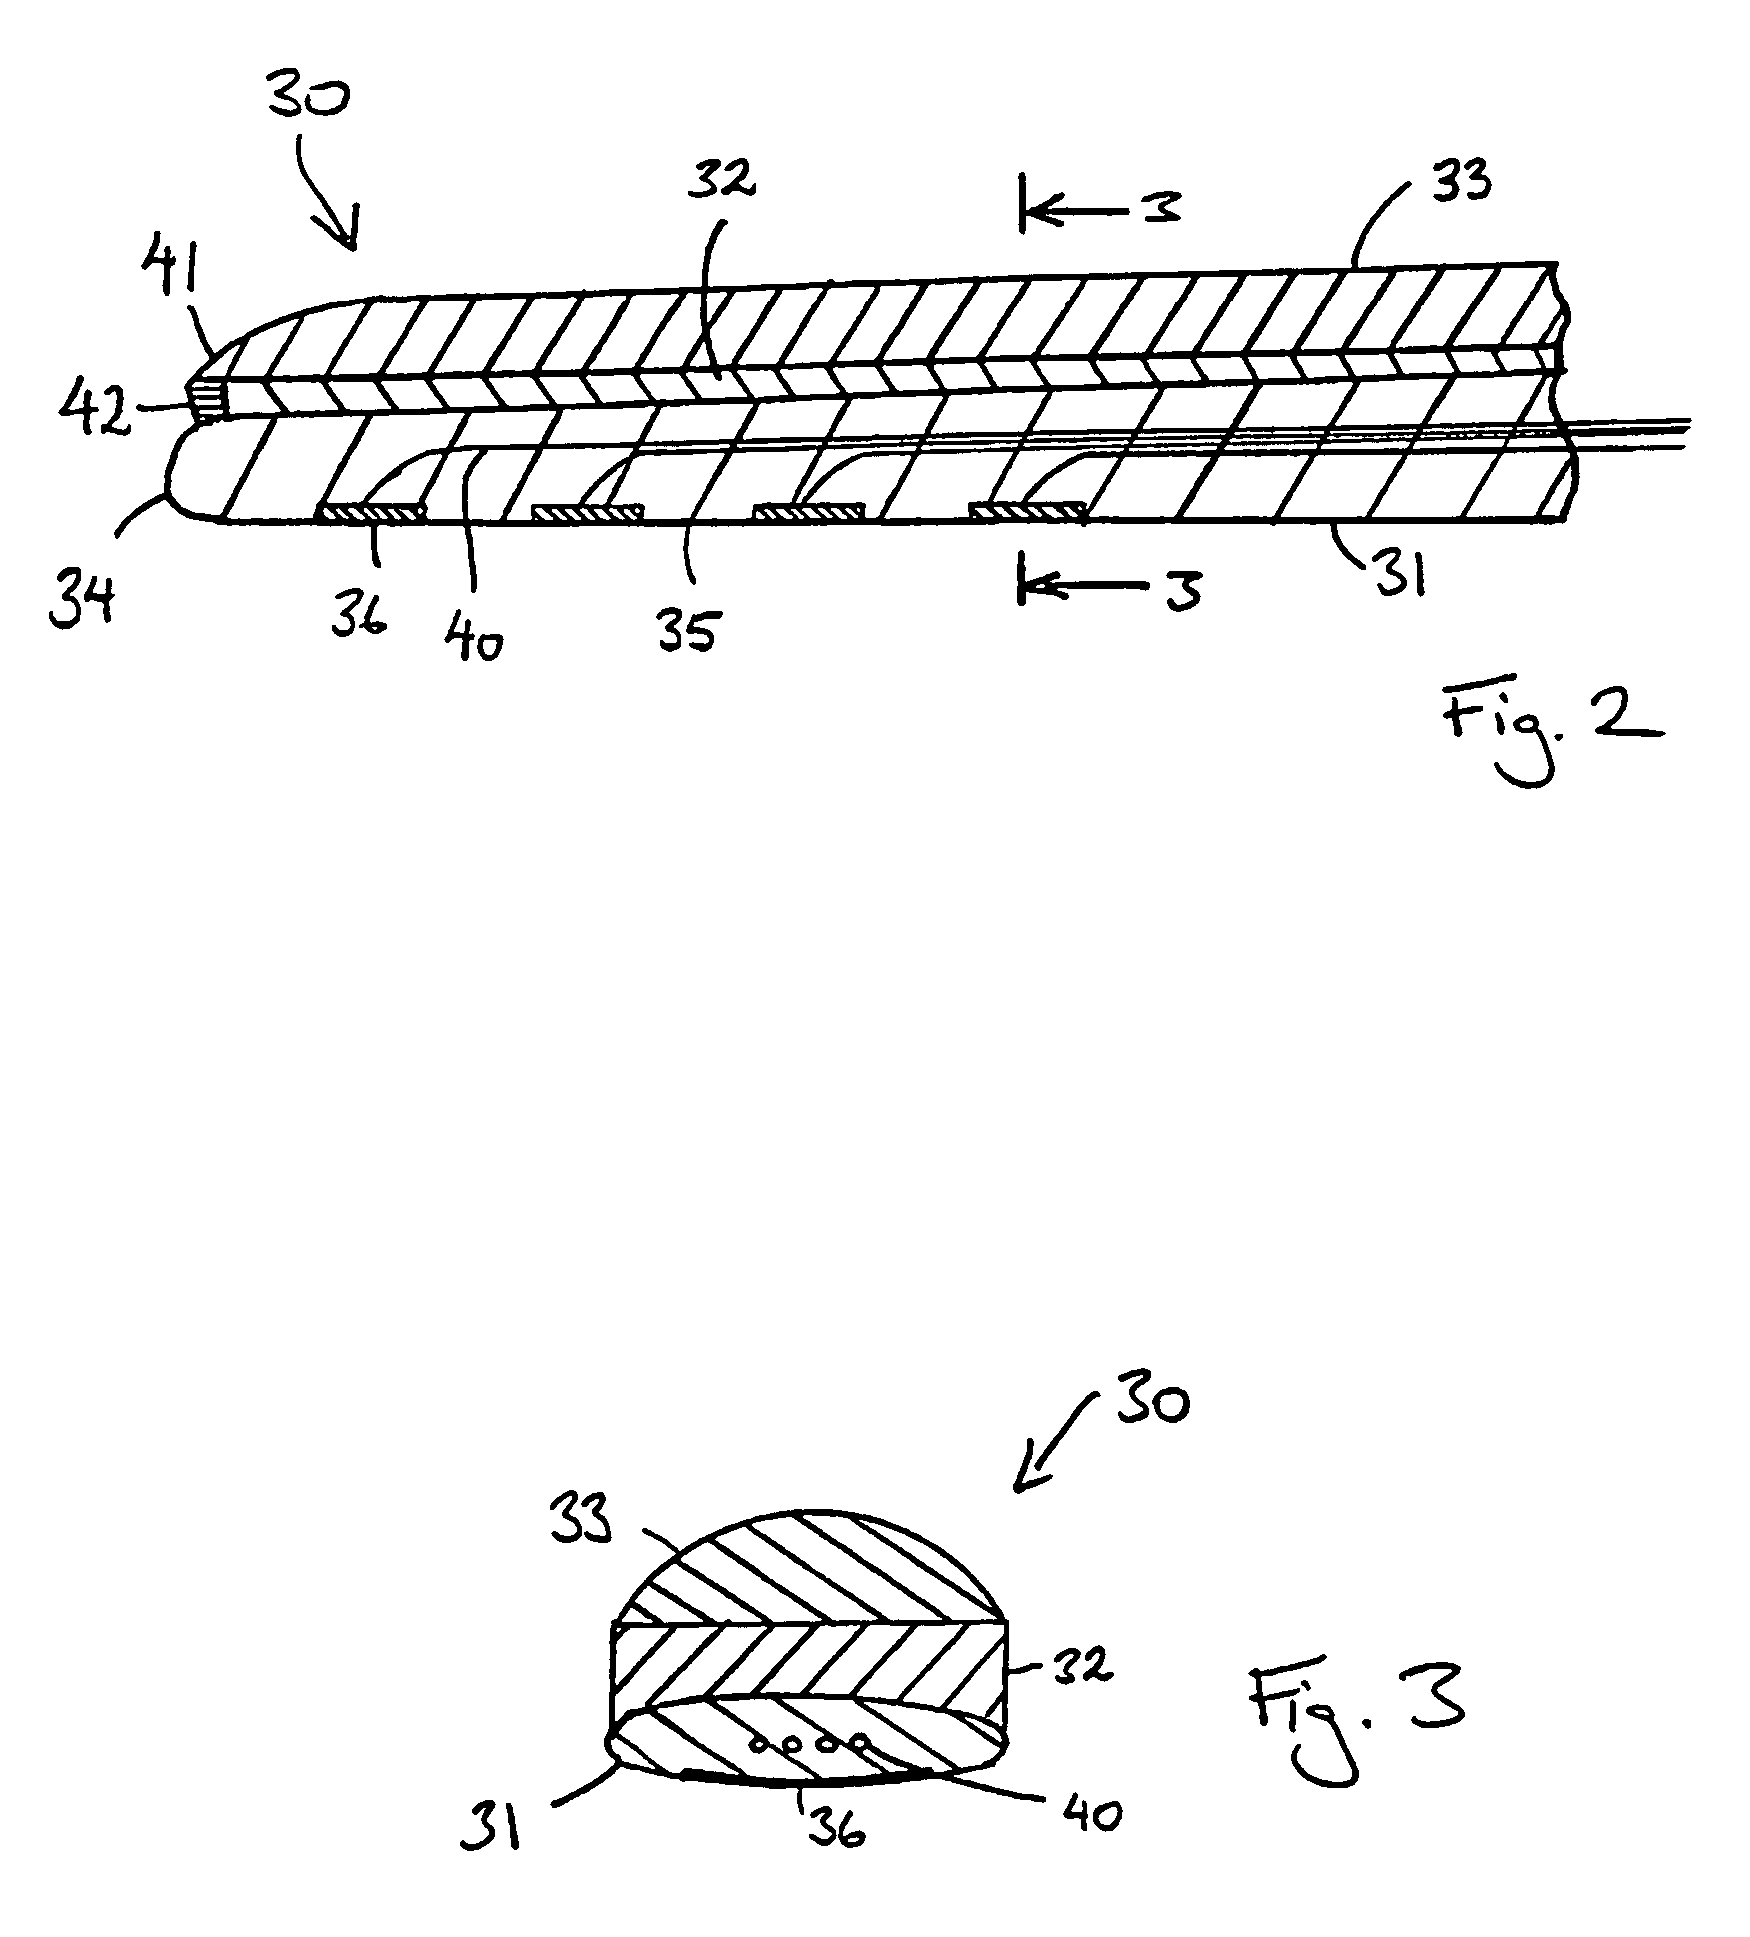 Curved cochlear implant electrode array